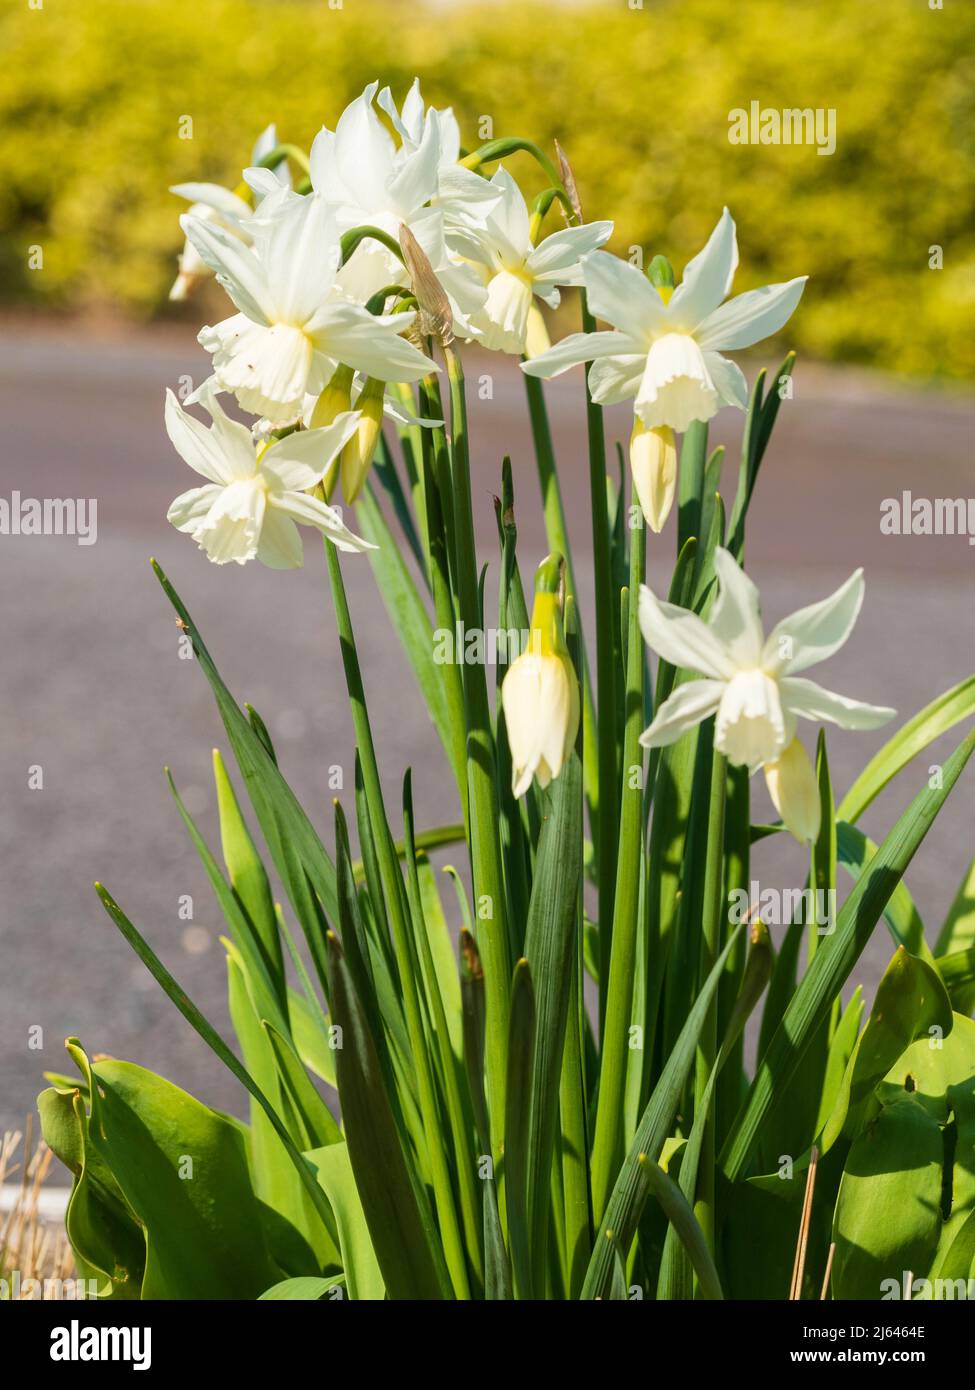 White spring flowers of the hardy triandrus daffodil, Narcissus 'Thalia' Stock Photo